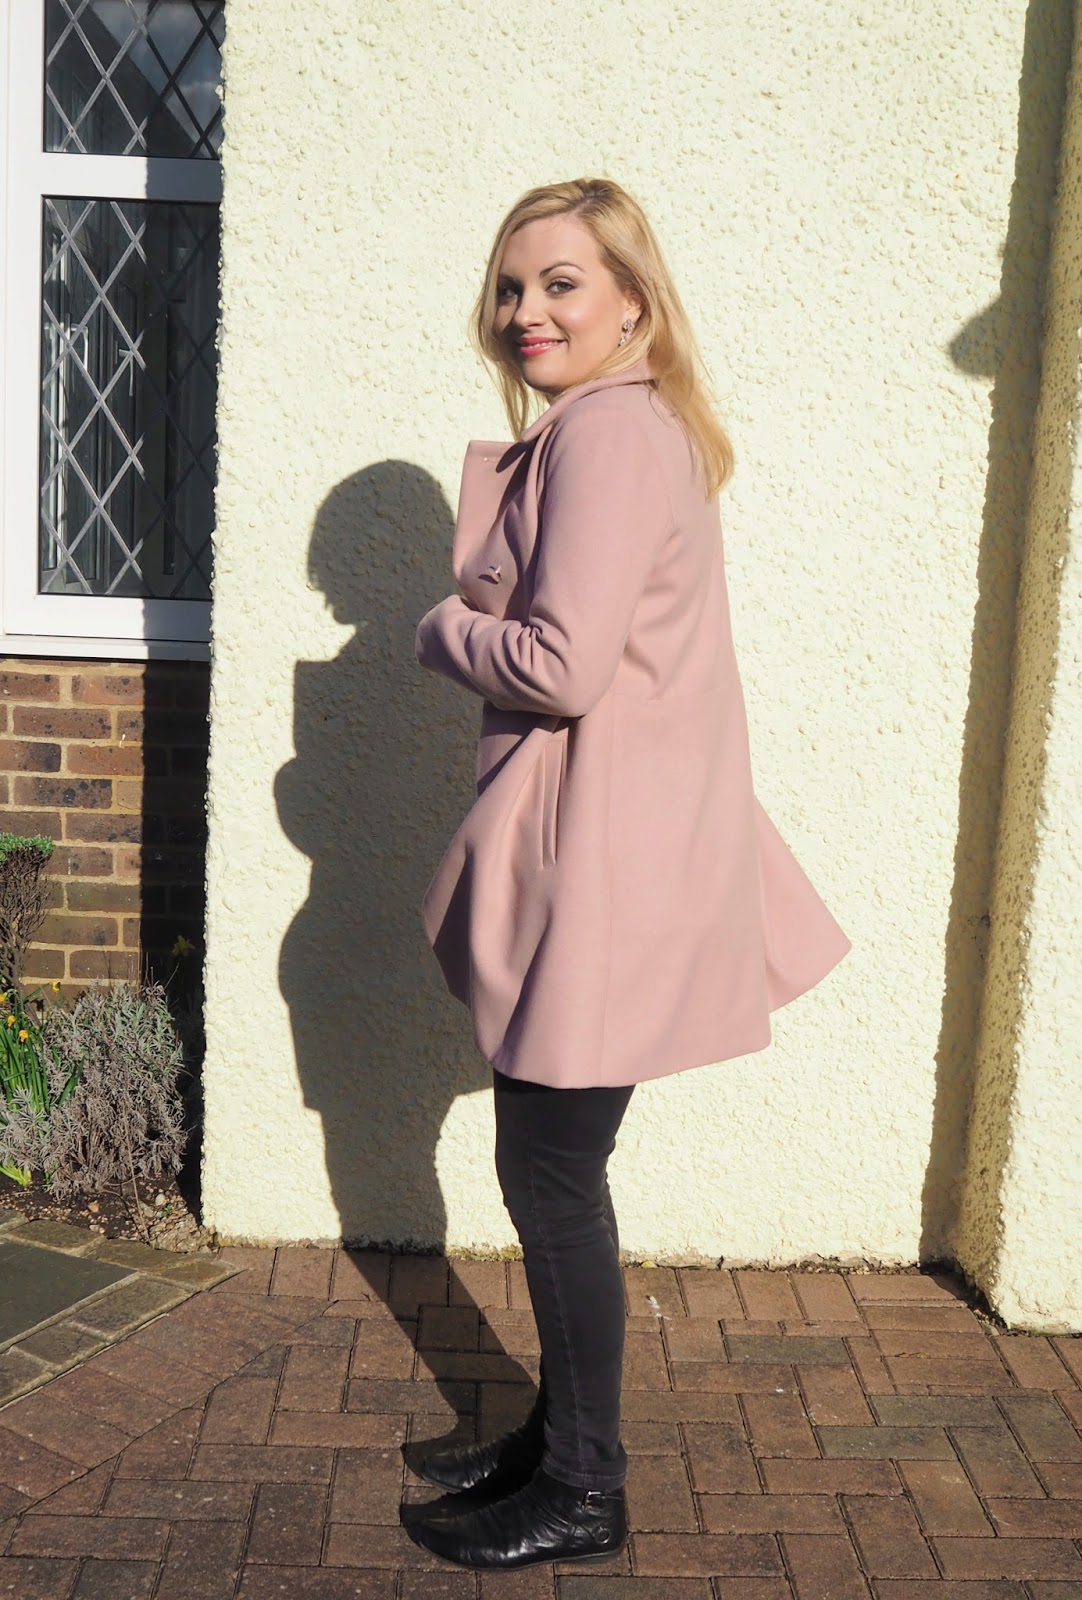 You Make Me Blush: Outfit | Katie Kirk Loves 